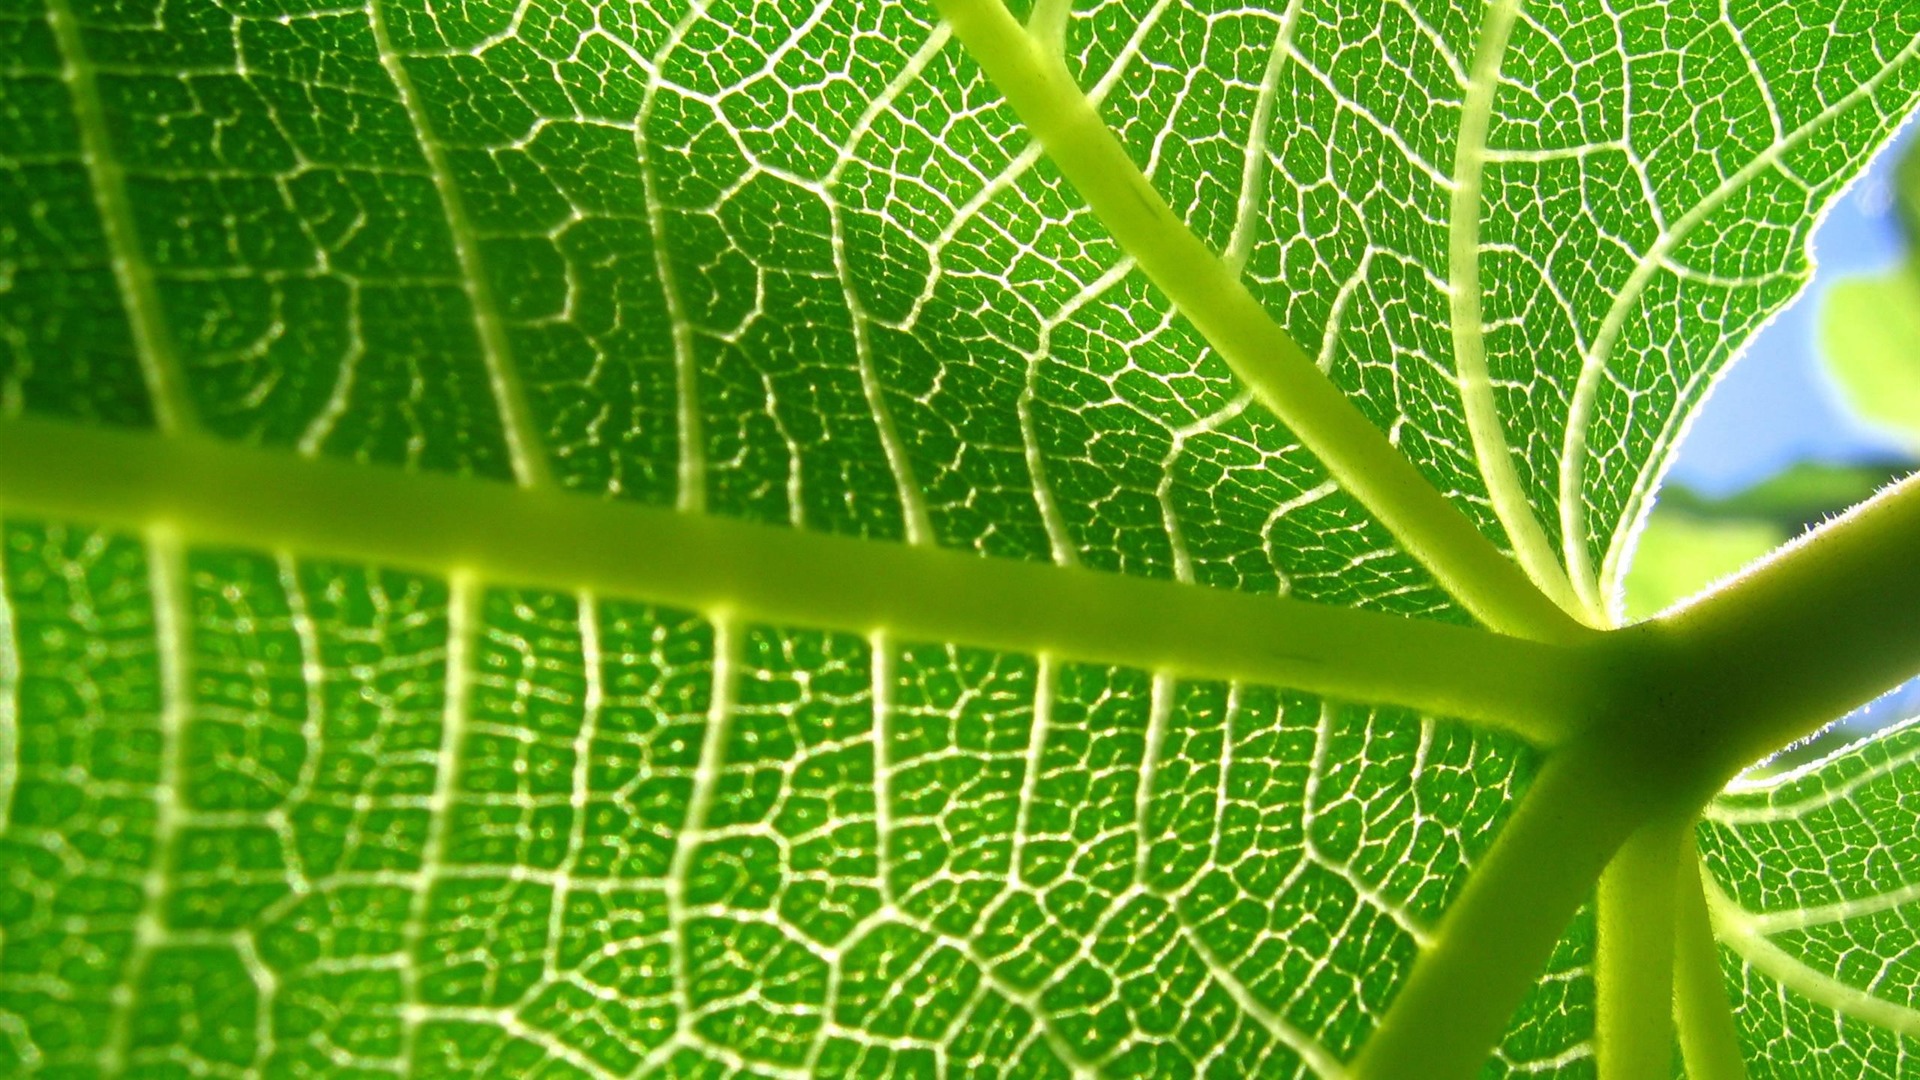 Large green leaves close-up flower wallpaper (2) #13 - 1920x1080